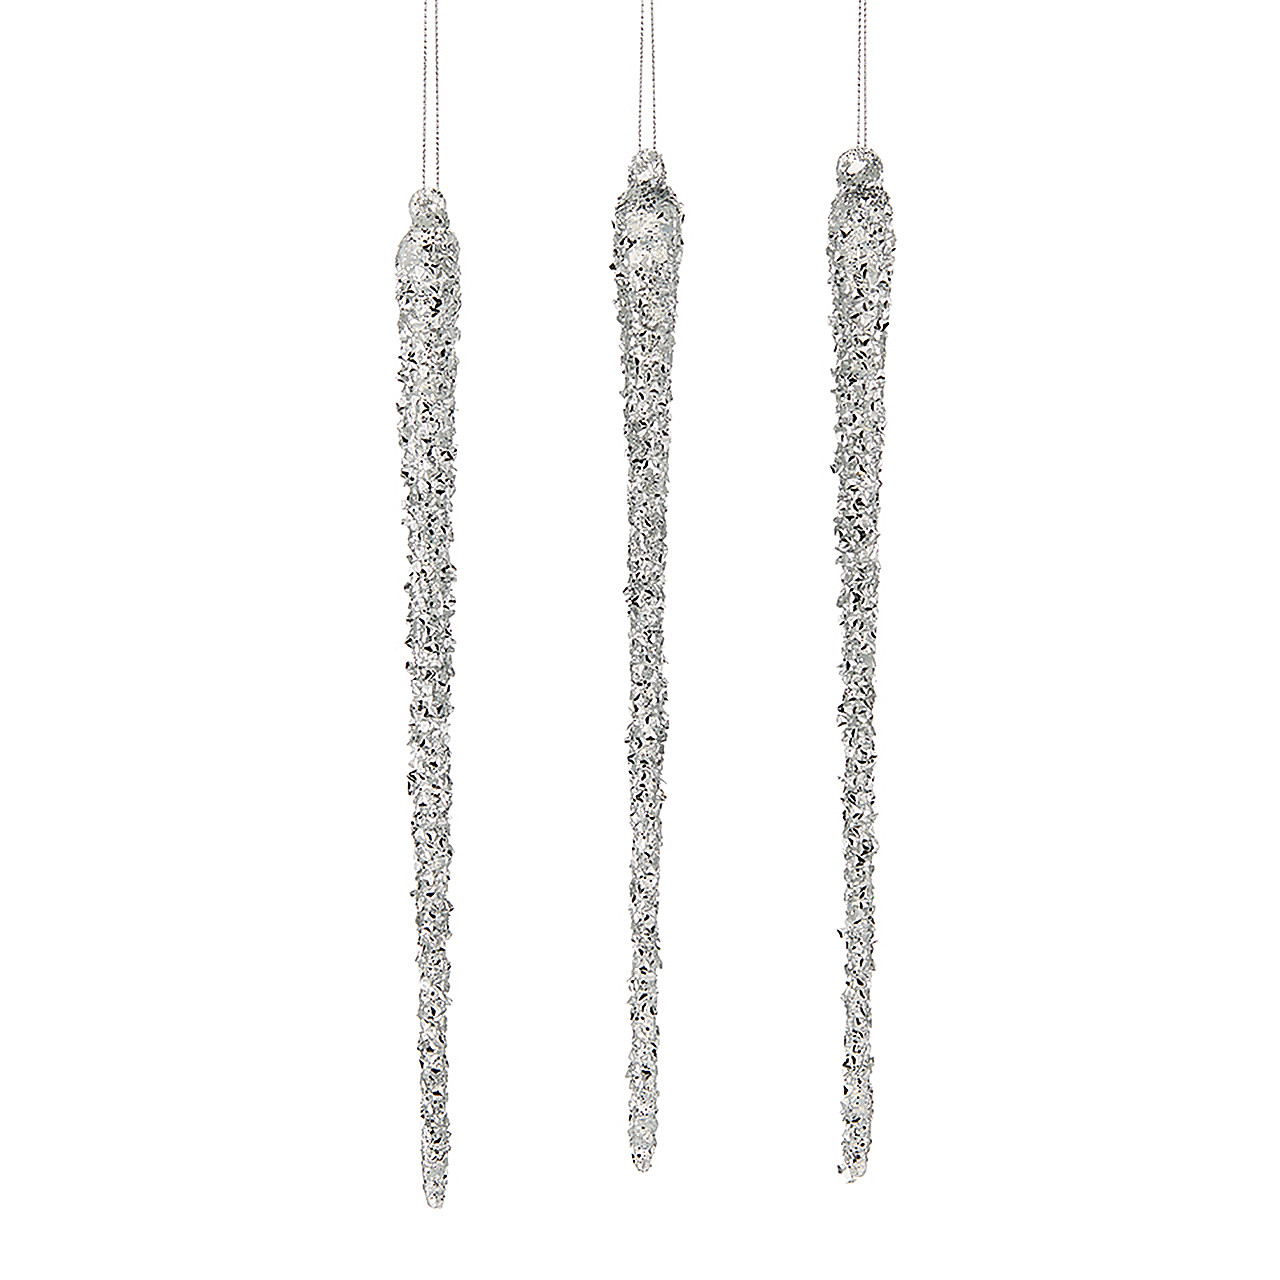 In-Store Only - 9.85 Inch Glass Silver Icicle Ornaments, Set of 3